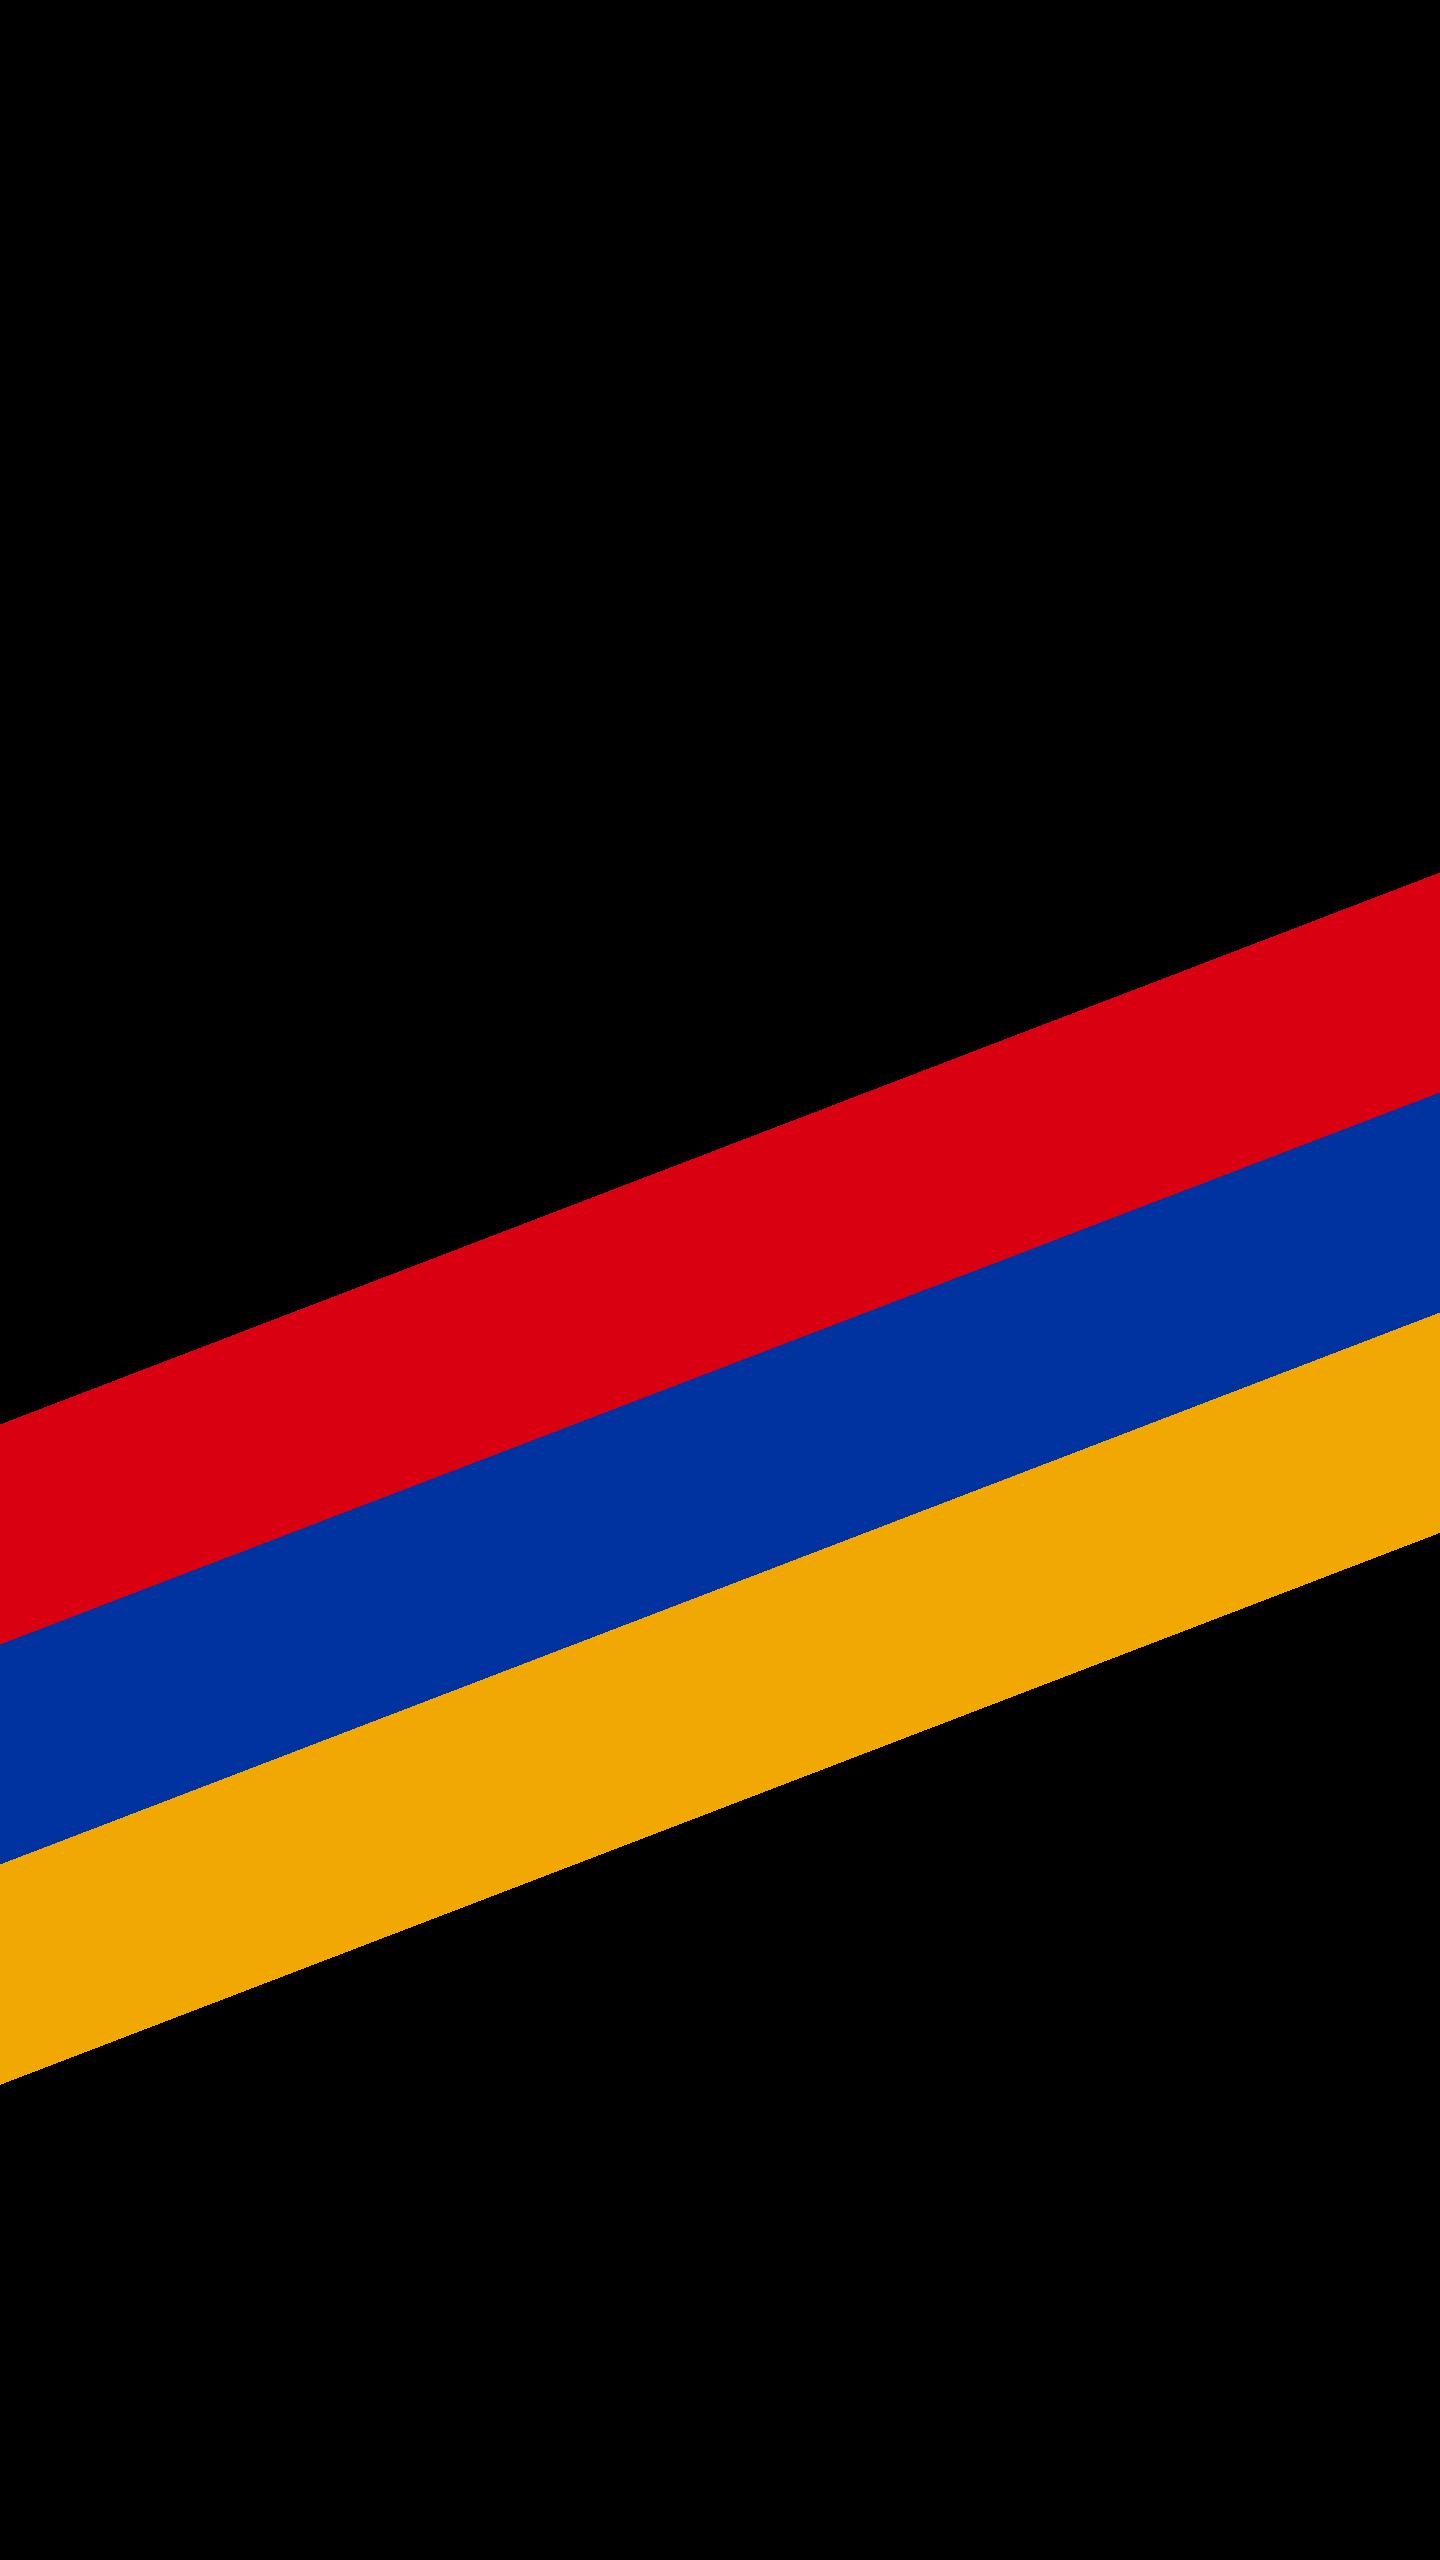 A black wallpaper with red, blue and gold stripes.